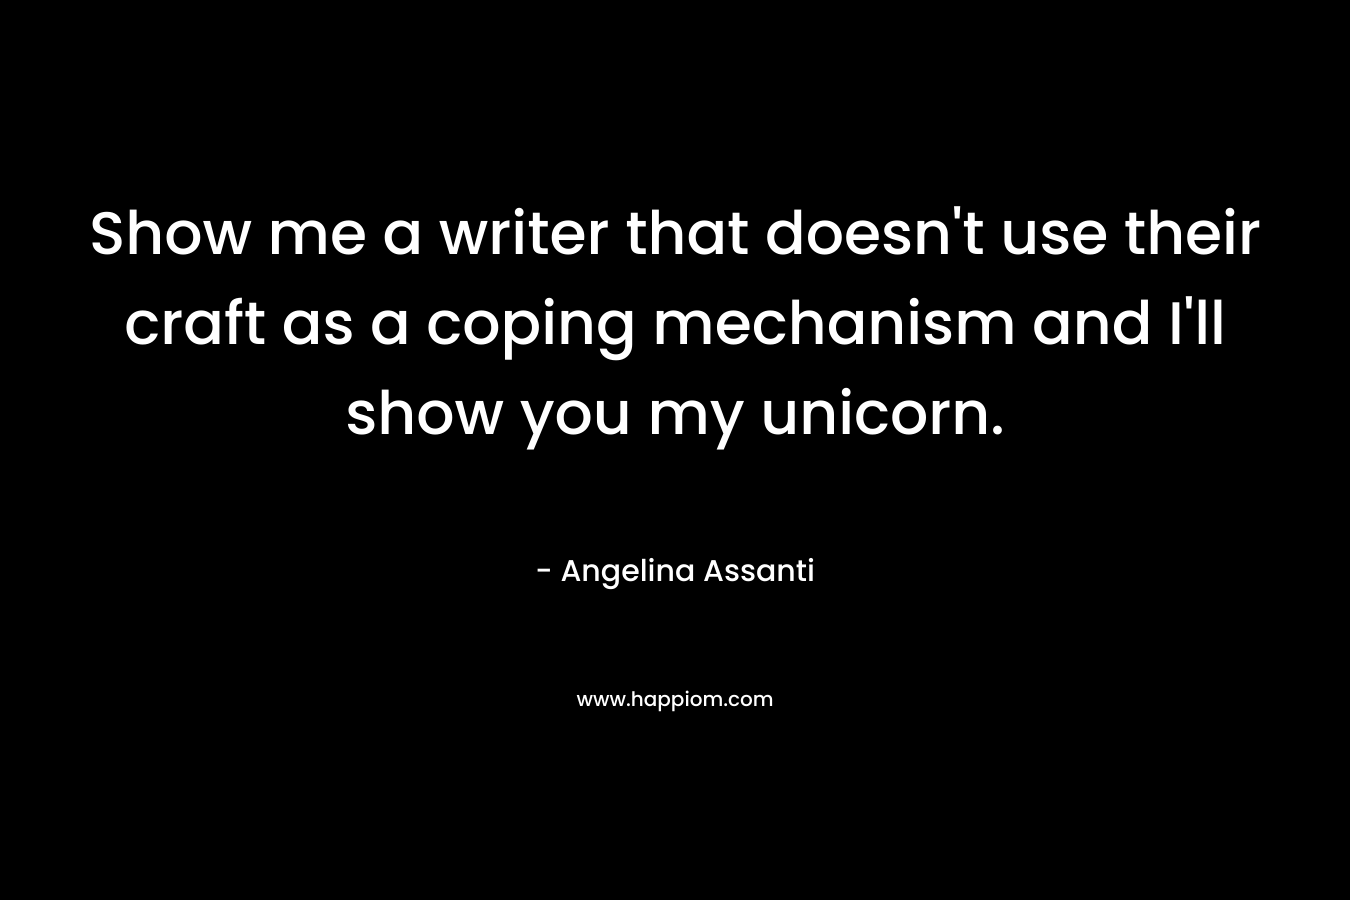 Show me a writer that doesn't use their craft as a coping mechanism and I'll show you my unicorn.